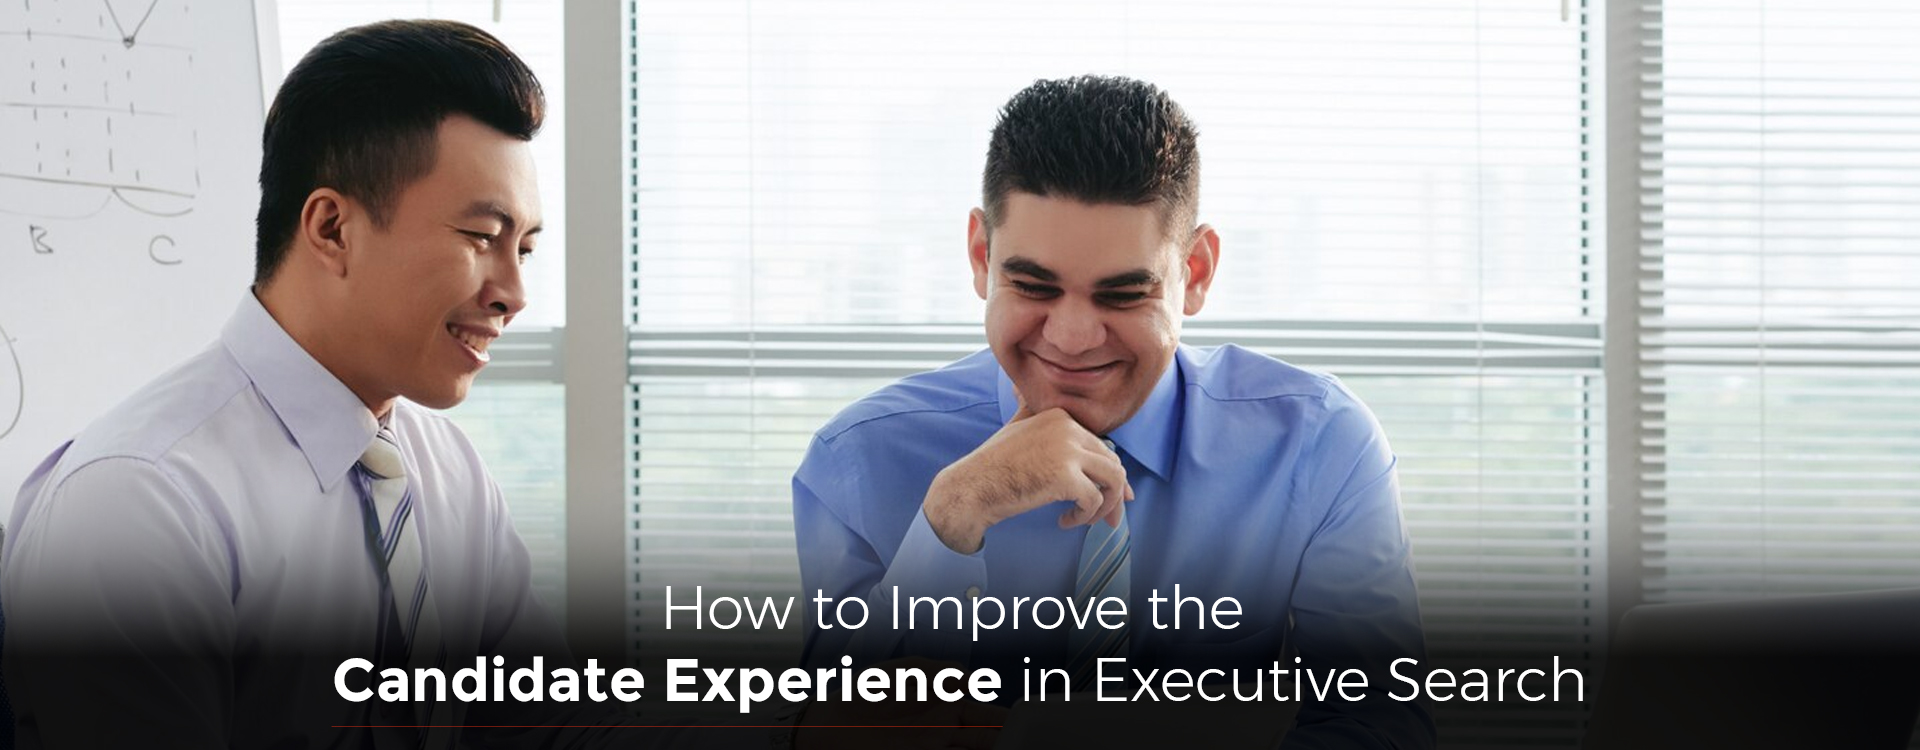 How to Improve the Candidate Experience in Executive Search